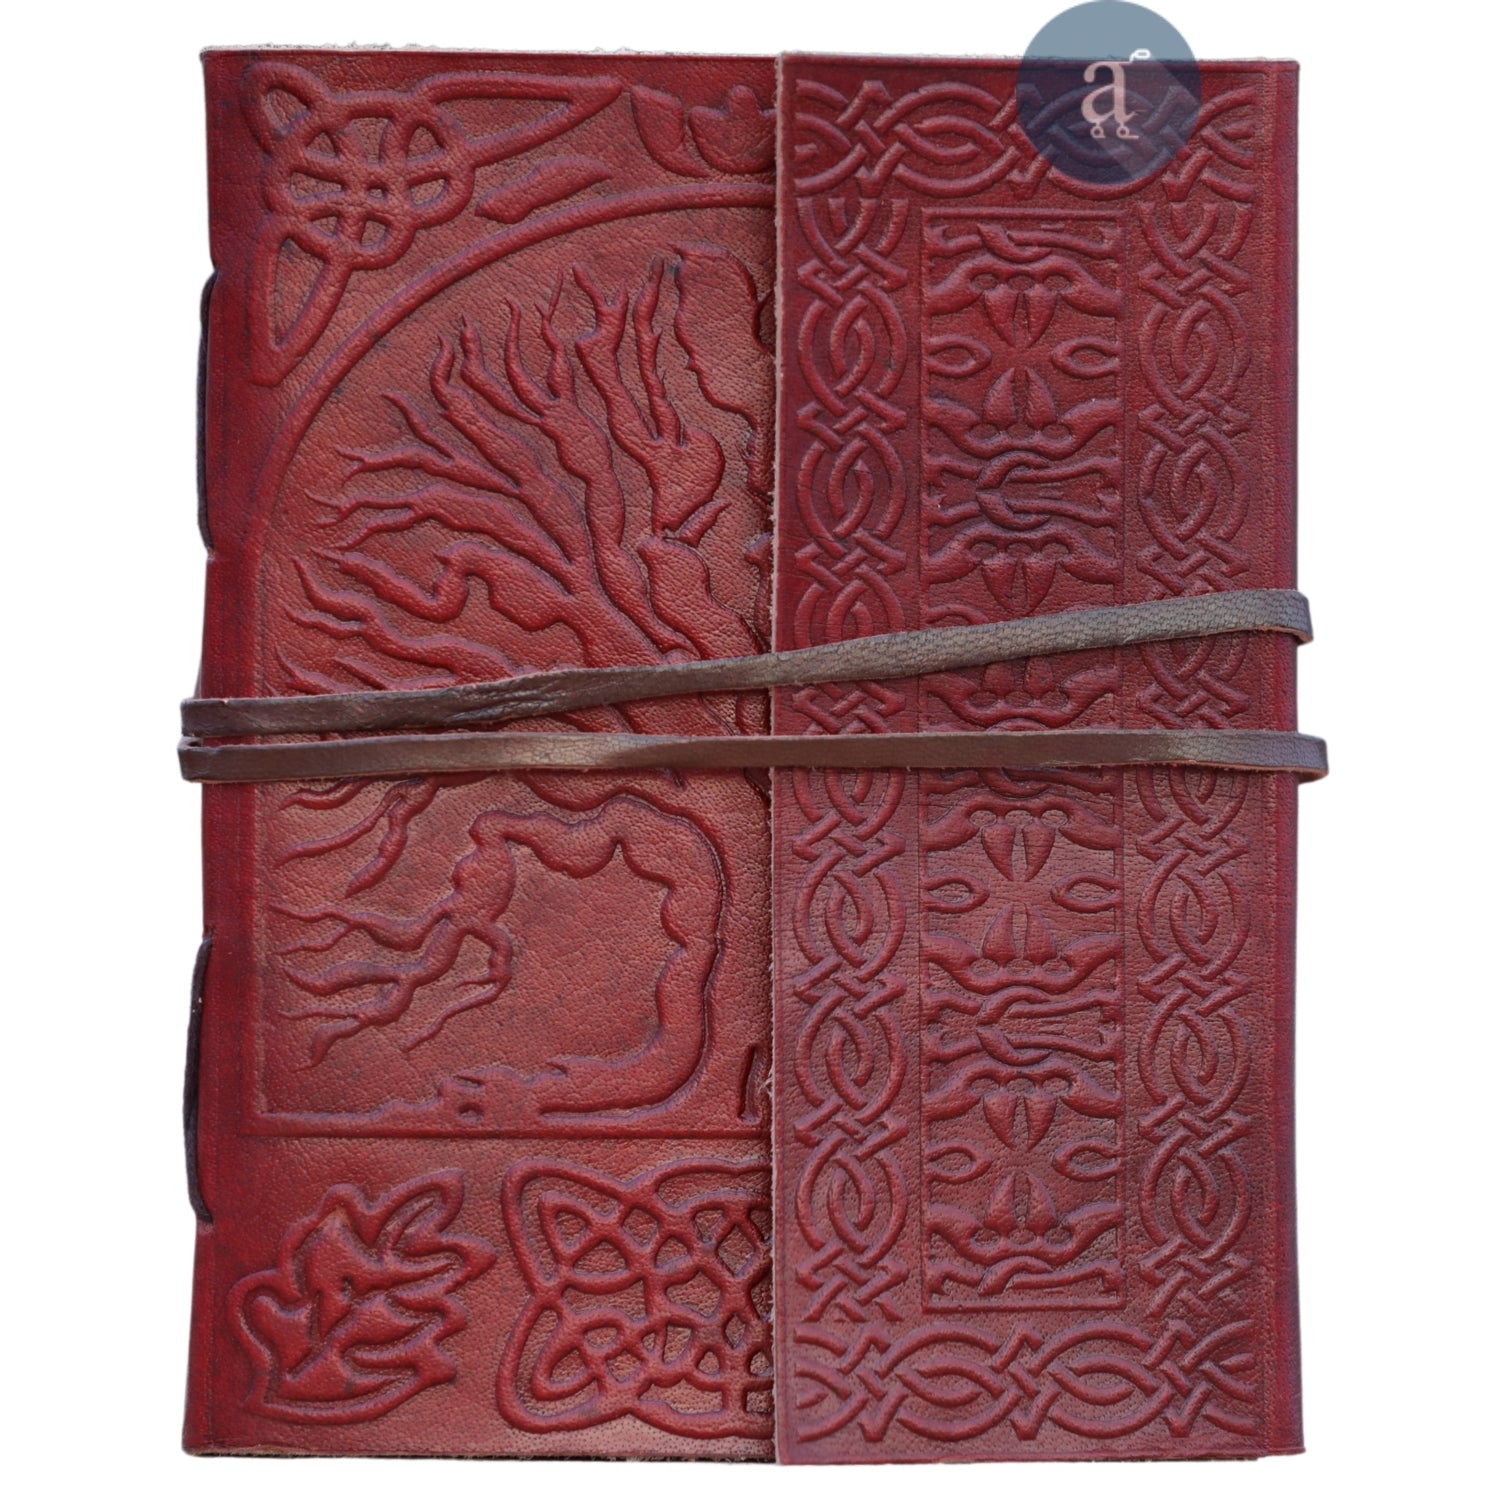 Tree Of Life Embossed Leather Journal